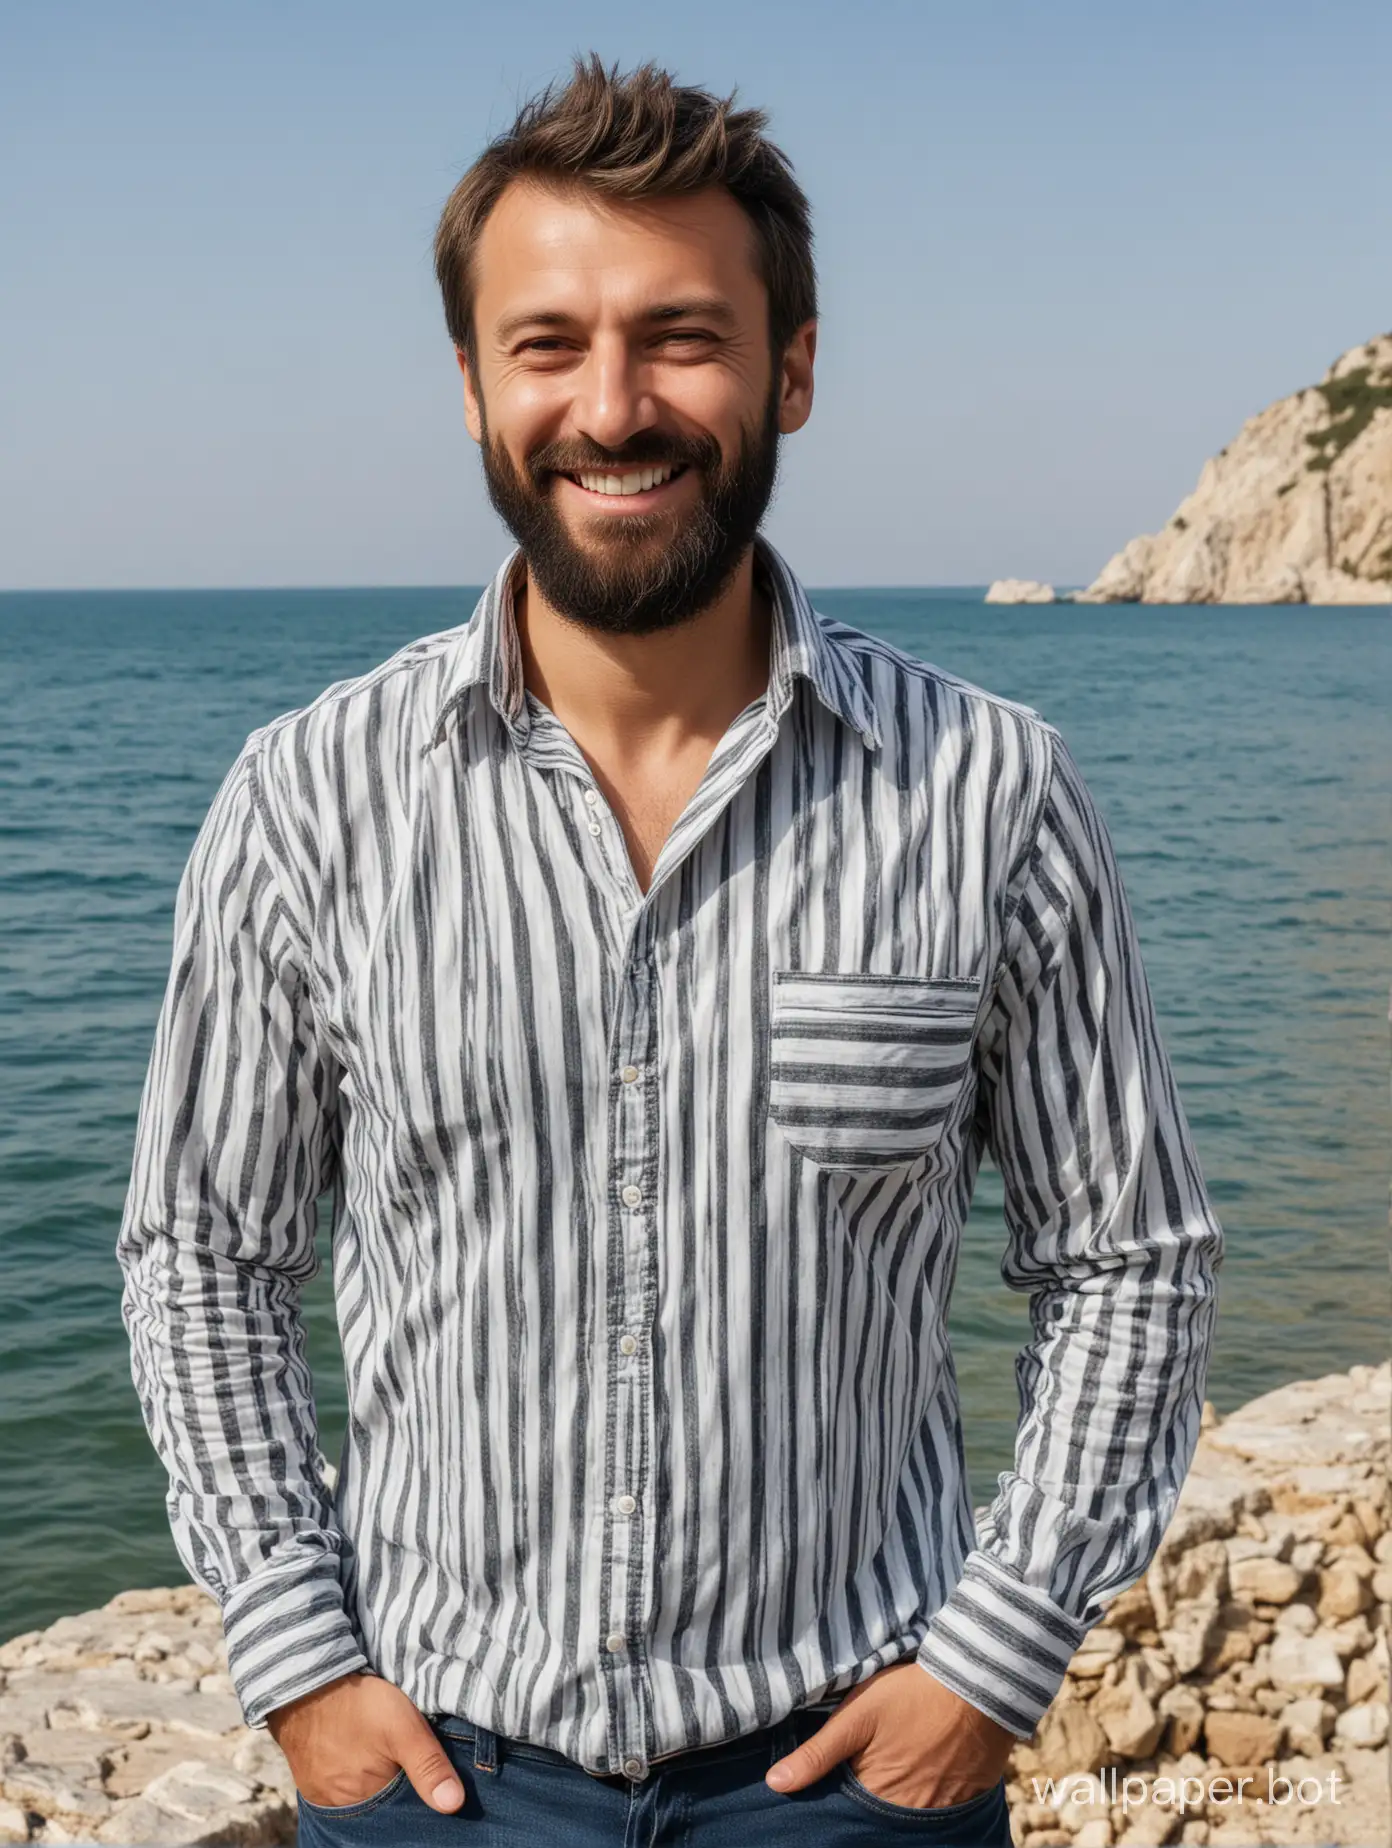 Smiling-Man-in-Striped-Shirt-Standing-by-Black-Sea-Shore-Crimea